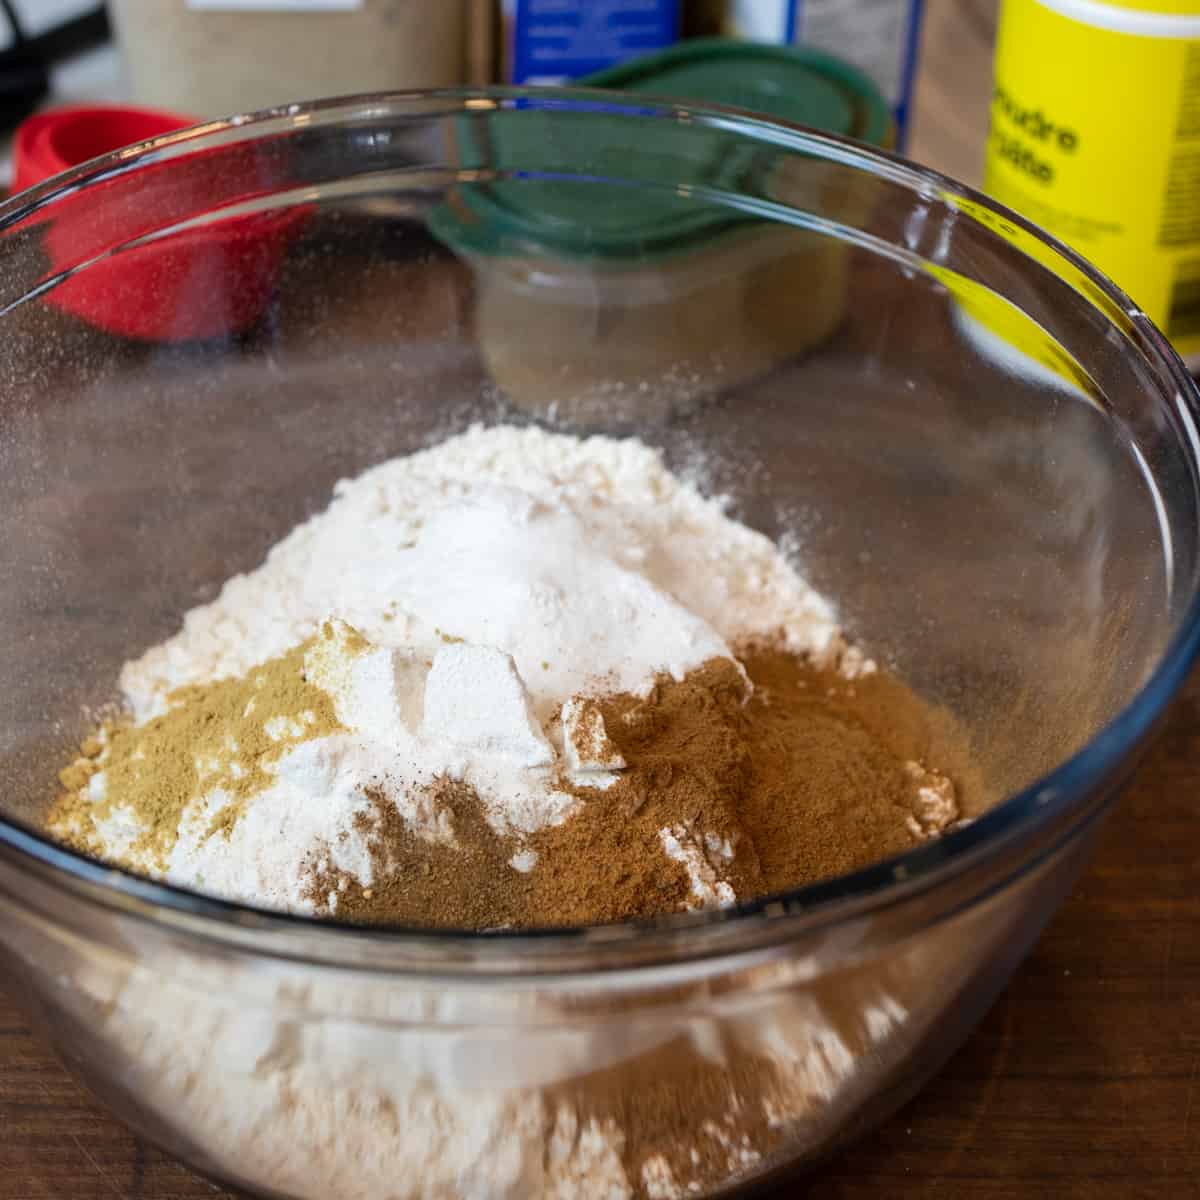 A glass bowl filled with flour, baking powder, baking soda and spices.